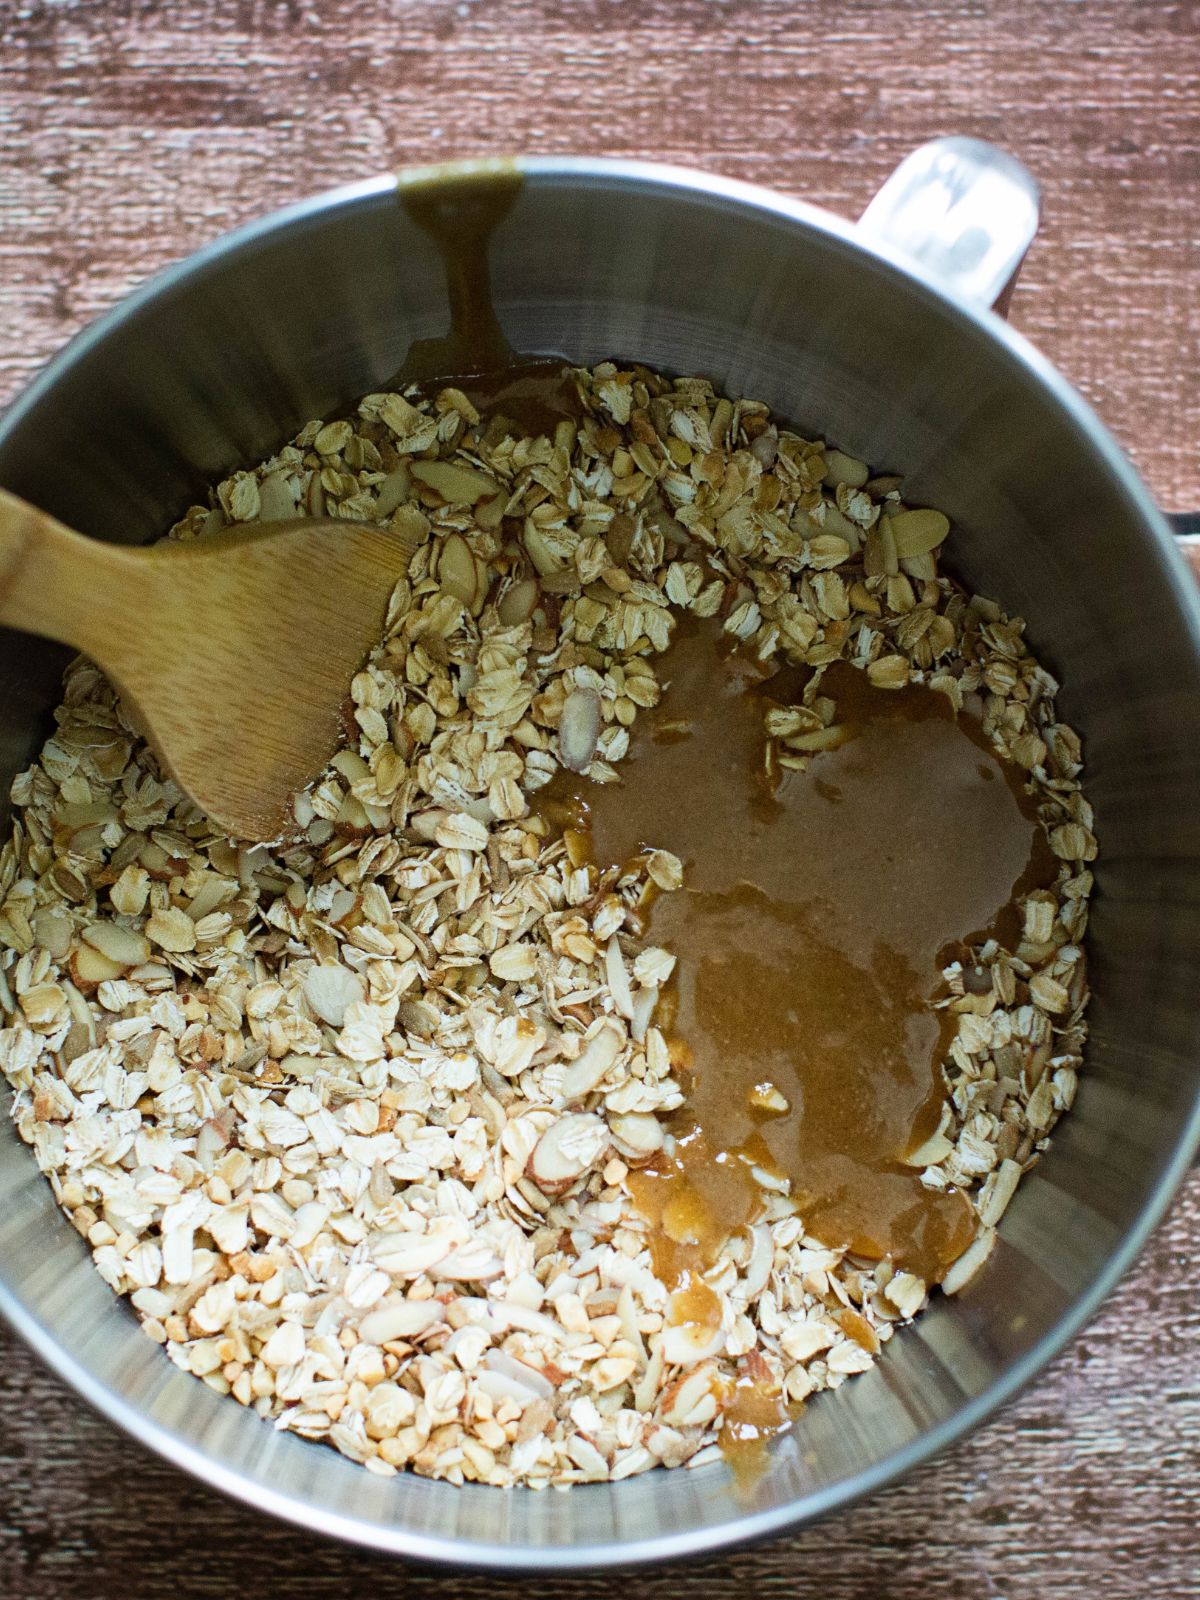 peanut butter mixture with oats.